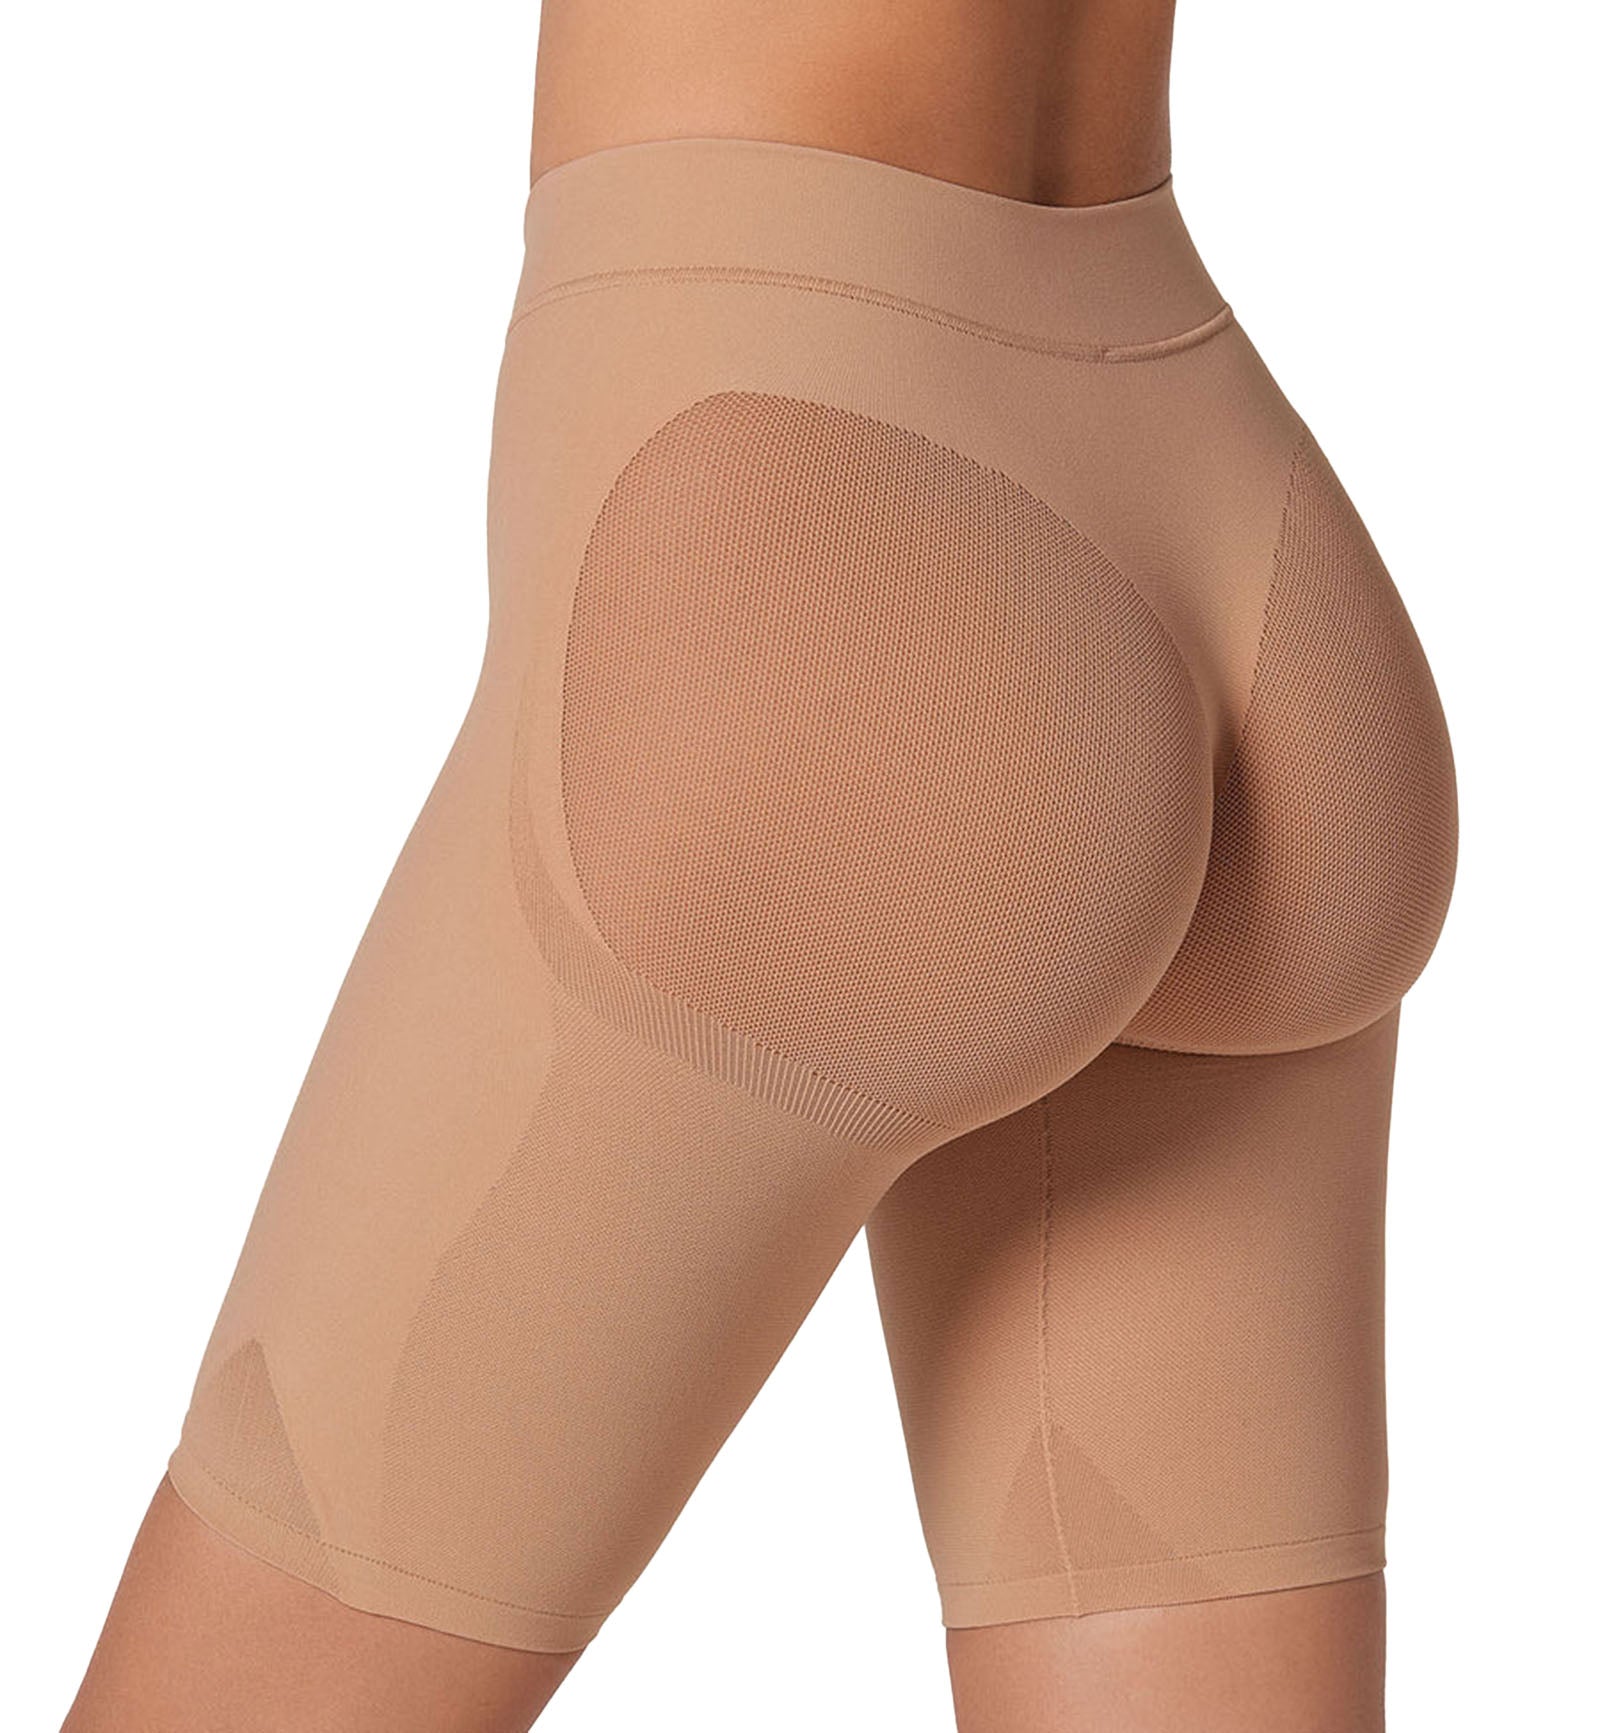 Leonisa Well-Rounded Invisible Butt Lifter Shaper Short (012778),S/M,Natural - Natural,S/M